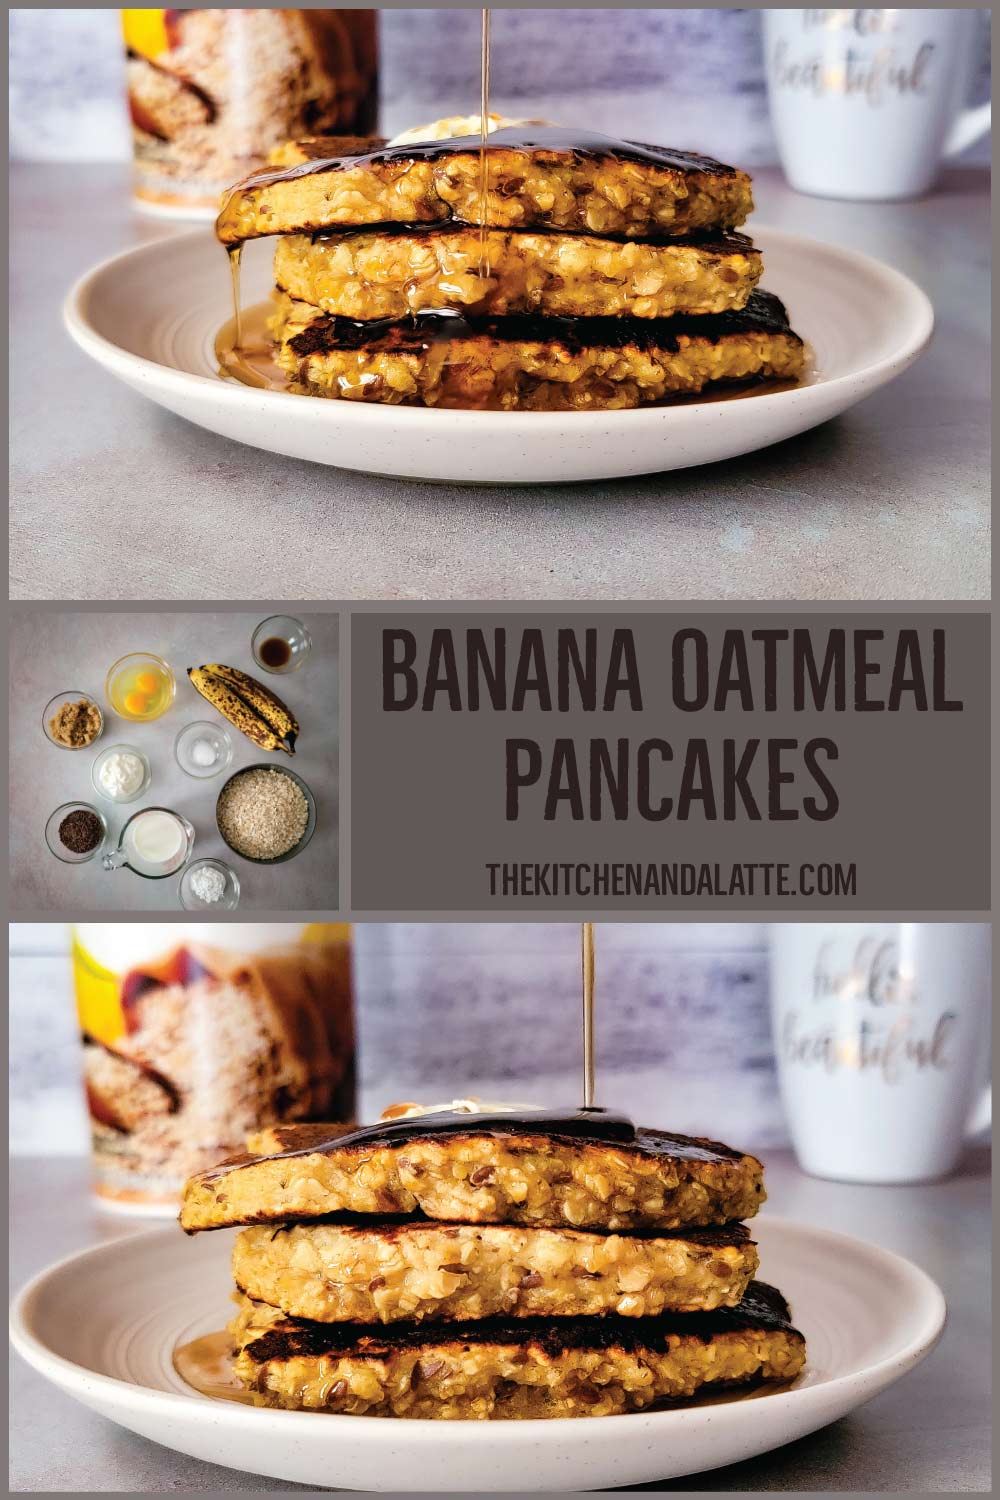 Banana Oatmeal Pancakes Pinterest graphic. Pancake ingredients prepped in prep bowls in 1 image and pancakes stacked on a small serving plate with maple syrup pouring over the top.